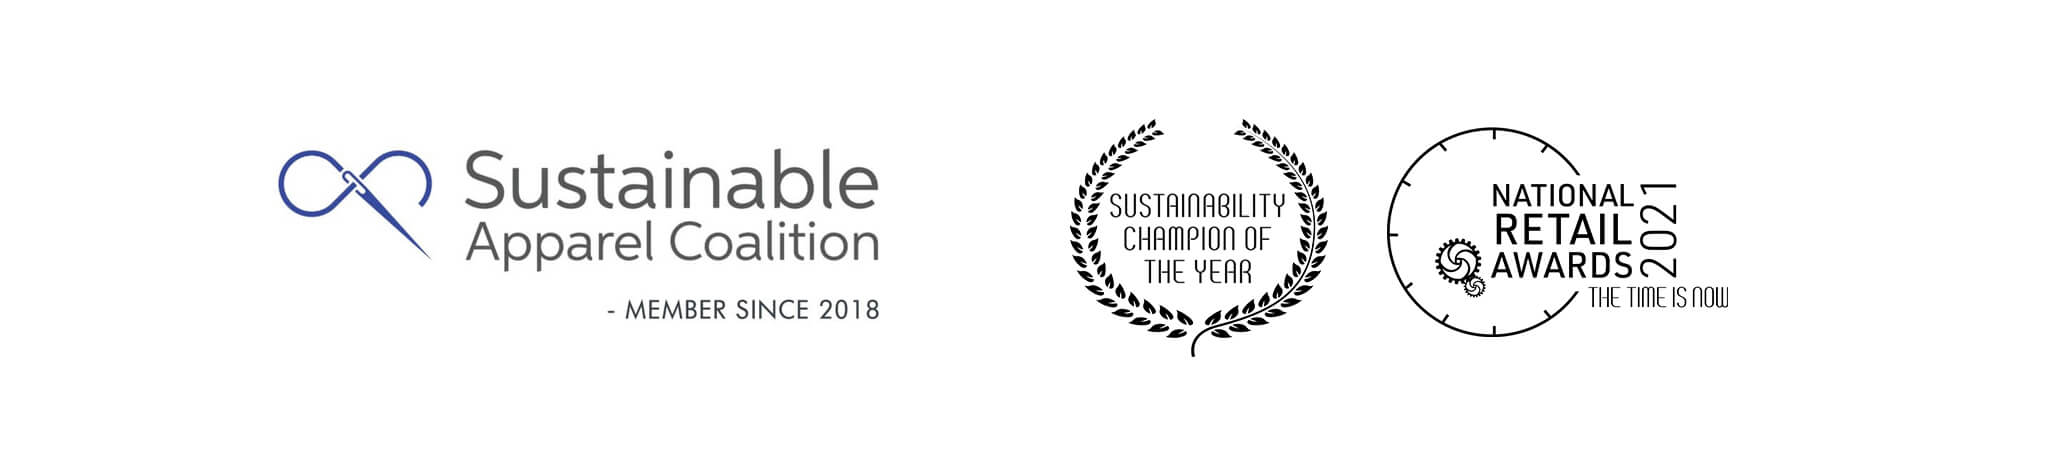 Macpac is a member of the sustainable apparel coalition and industry collaboration on benchmarking best practices for environmental and social responsibility